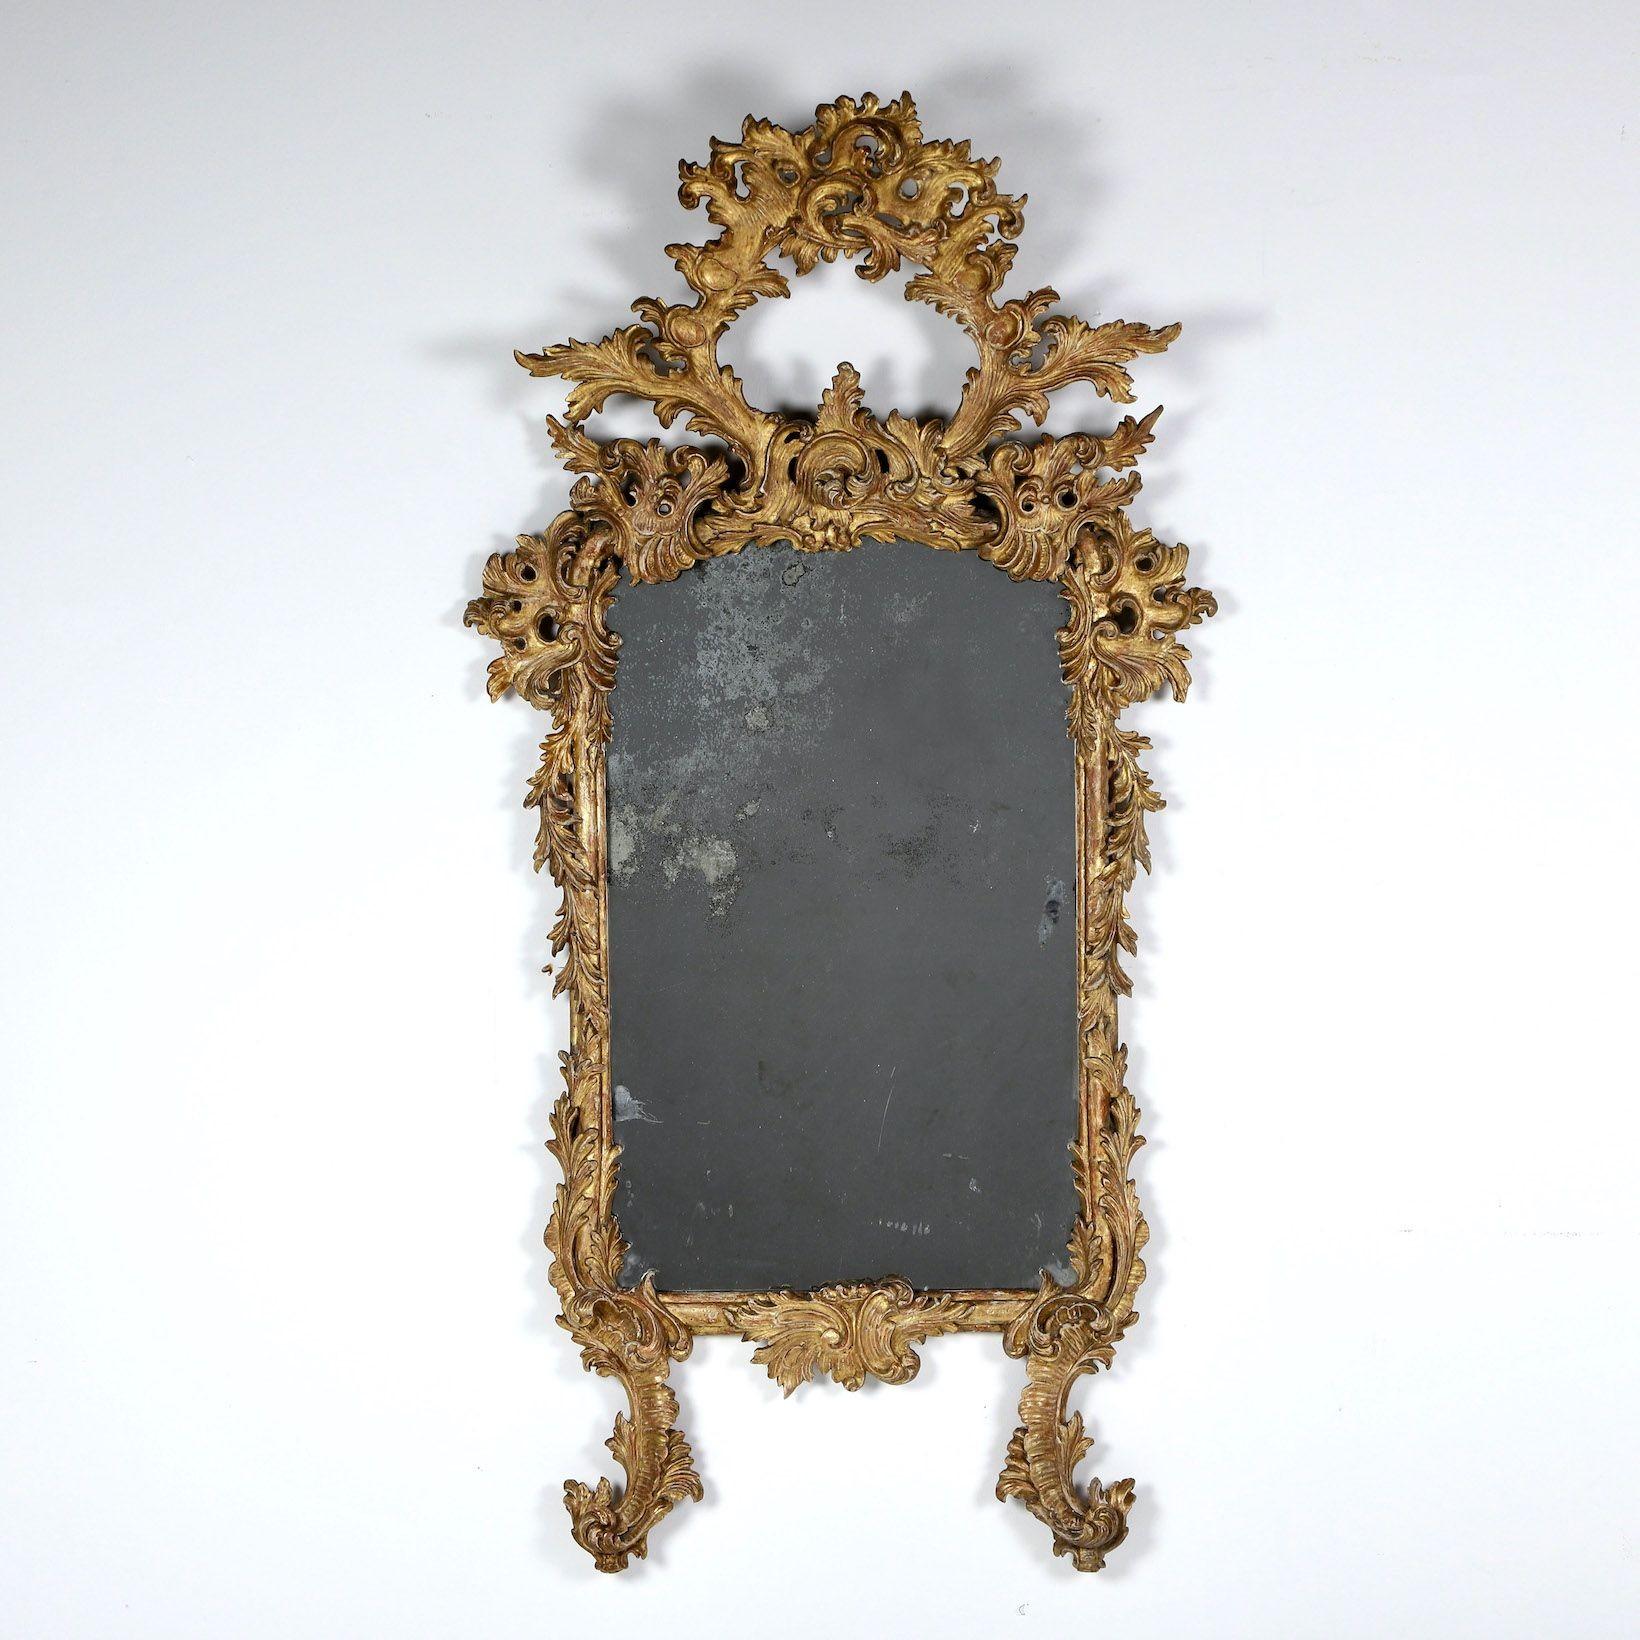 Fine, beautifully aged, original giltwood mirror with original mirror plate in the Rococo style with flowing, symmetrical leaf motif, circa 1820. Elegant form, carved in sections.

The Rococo period followed the Baroque period and is often described